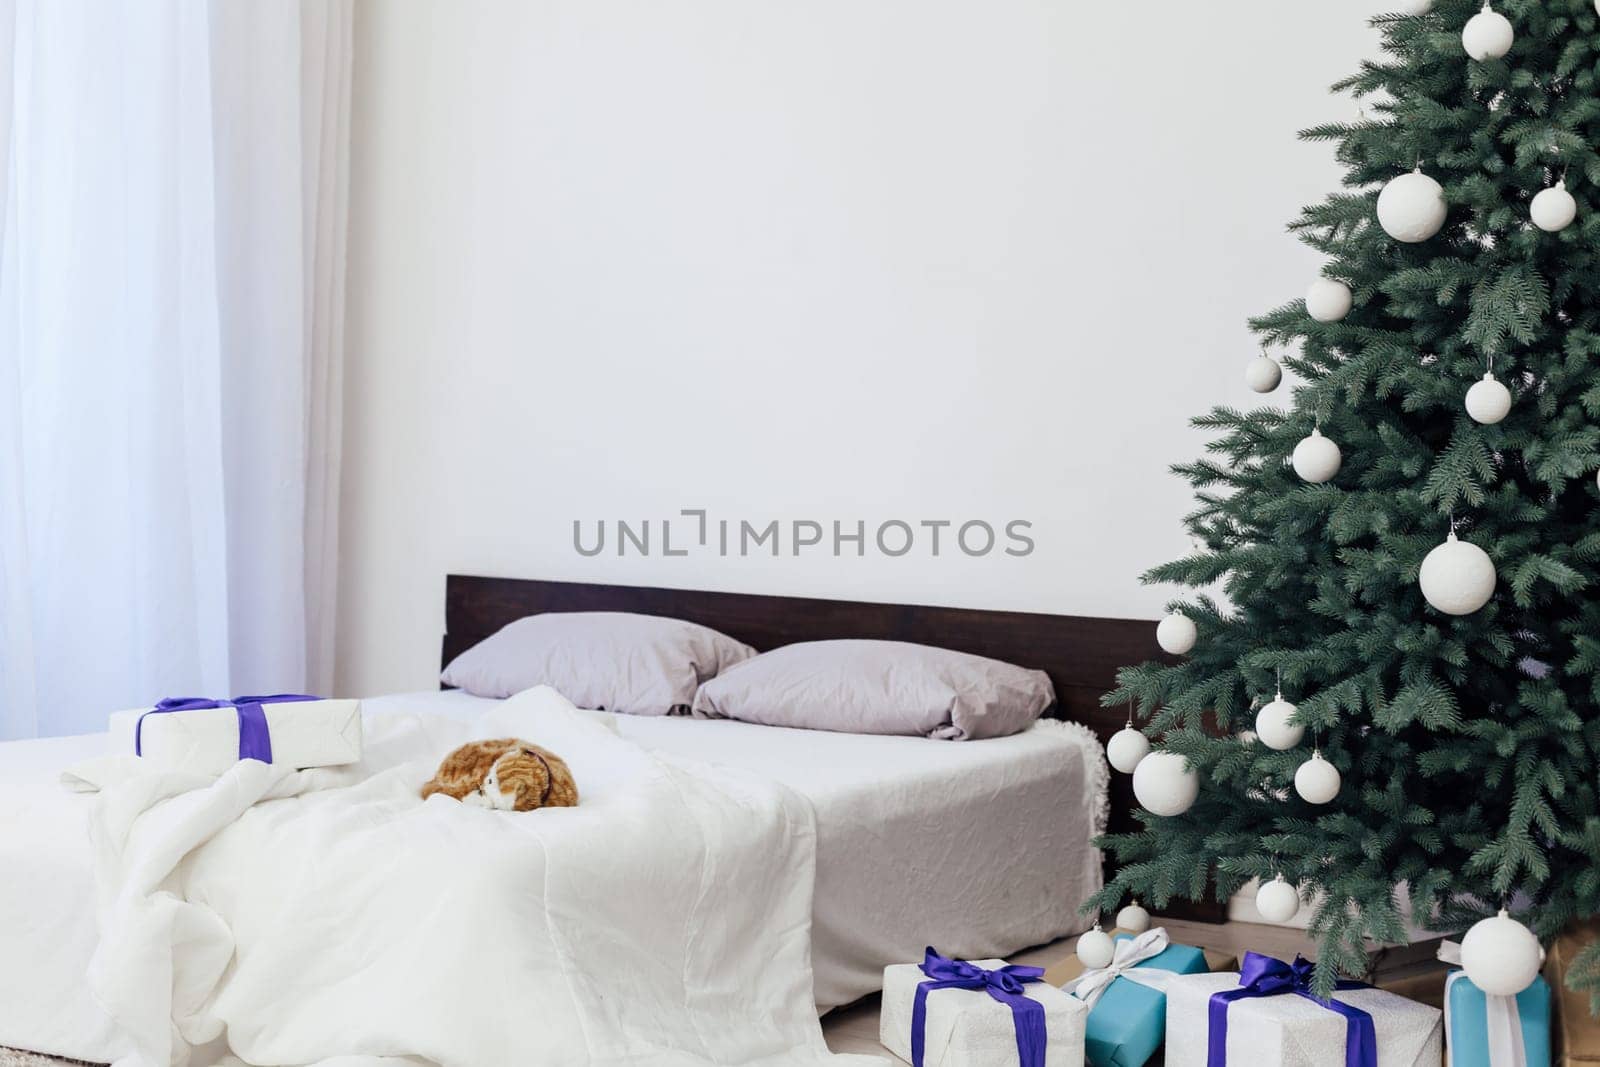 New year bedroom decor with Christmas tree bed with gifts and garlands